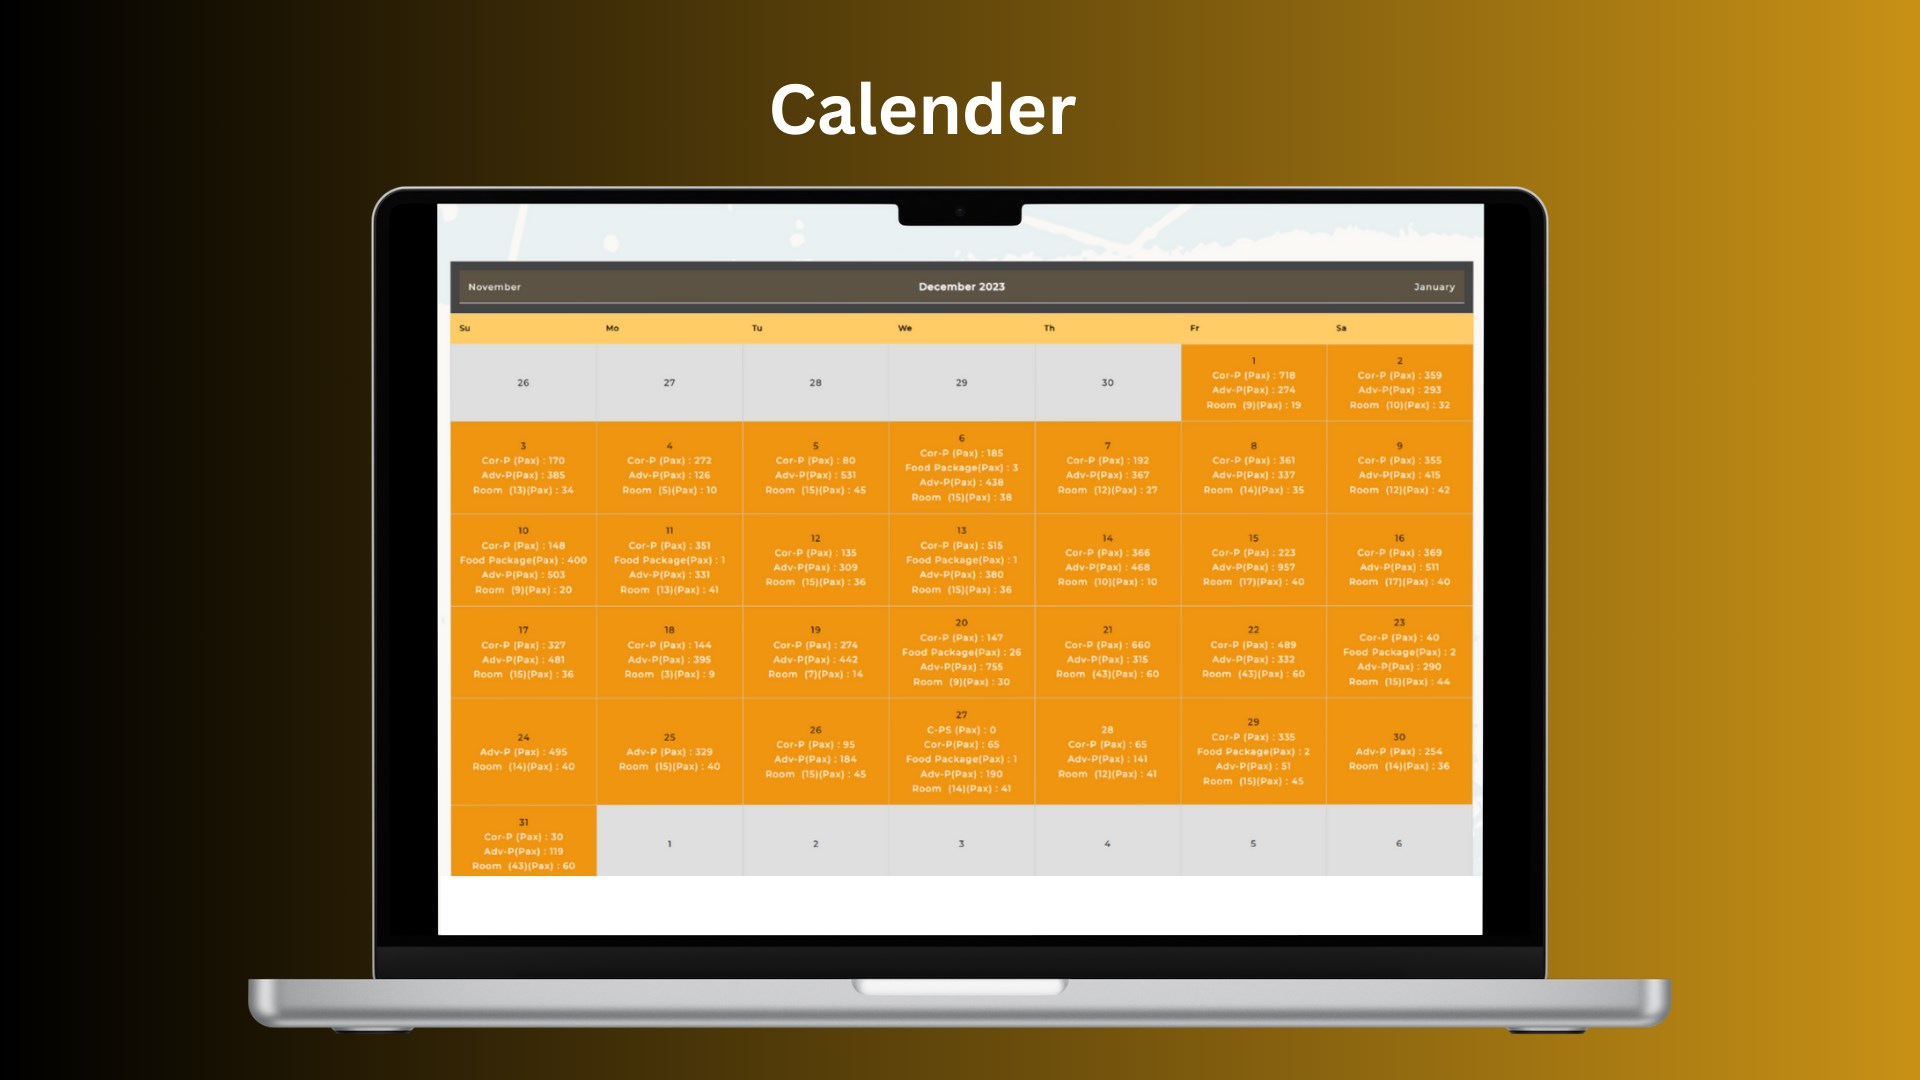 Exclusive calendar feature showcasing comprehensive details on the availability of rooms, venues, and events.